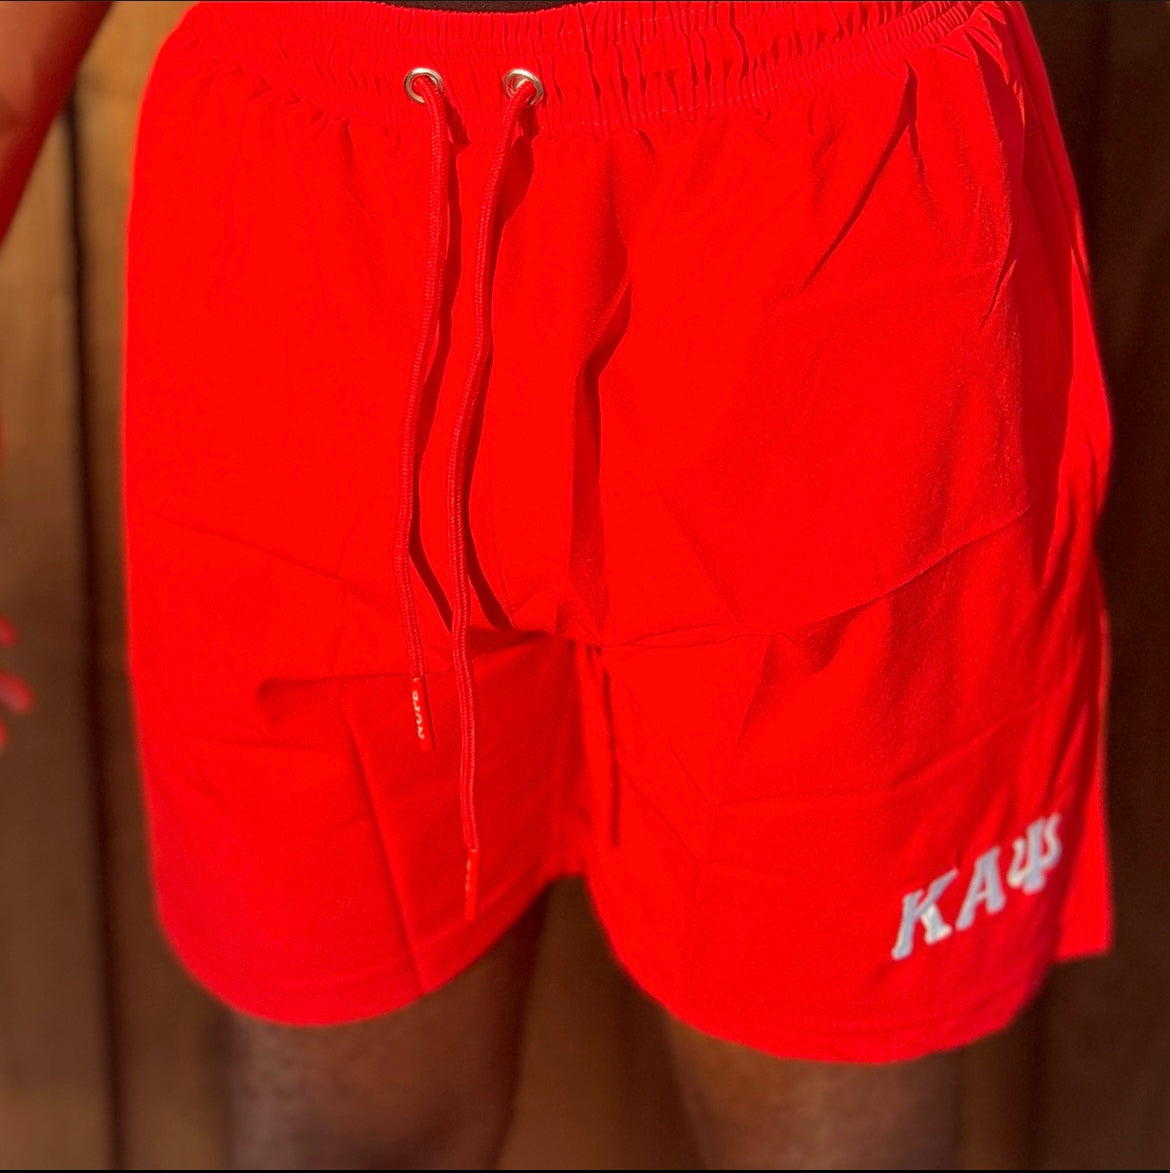 Enjoy your spring & summer with a Nupe Kave shorts constructed from a premium polyester blend that is ultra-soft and comfortable. This short is lightweight with moisture-wicking fabric is antimicrobial to keep you dry and feeling fresh. Perfect for an early morning workout or dip in the ocean while on vacation. Finished with pockets and an elasticated waist band with drawstrings for the phones and extra items.